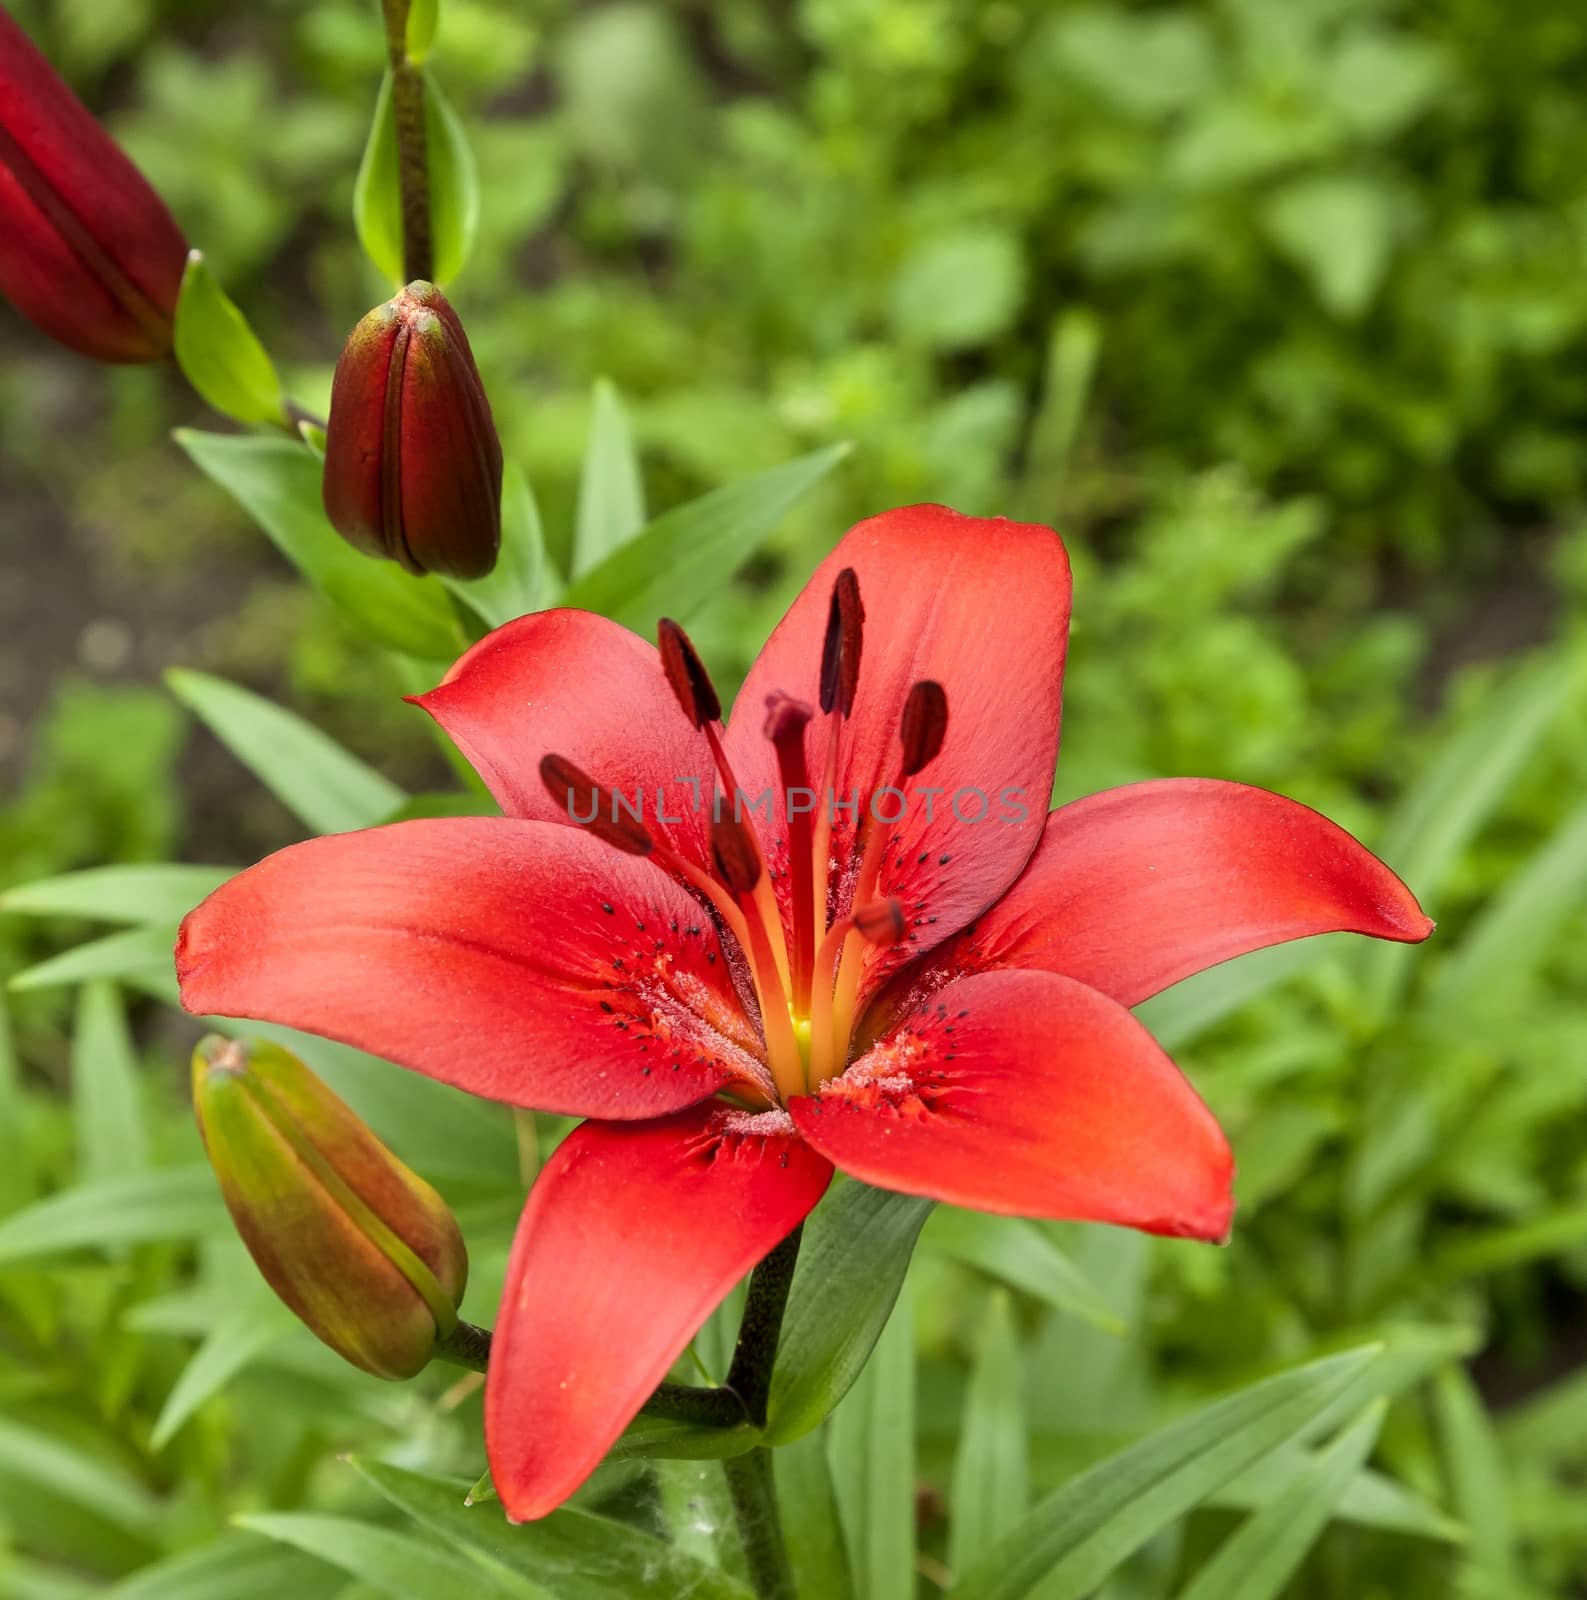 just bloomed red Lily on blurred nature background